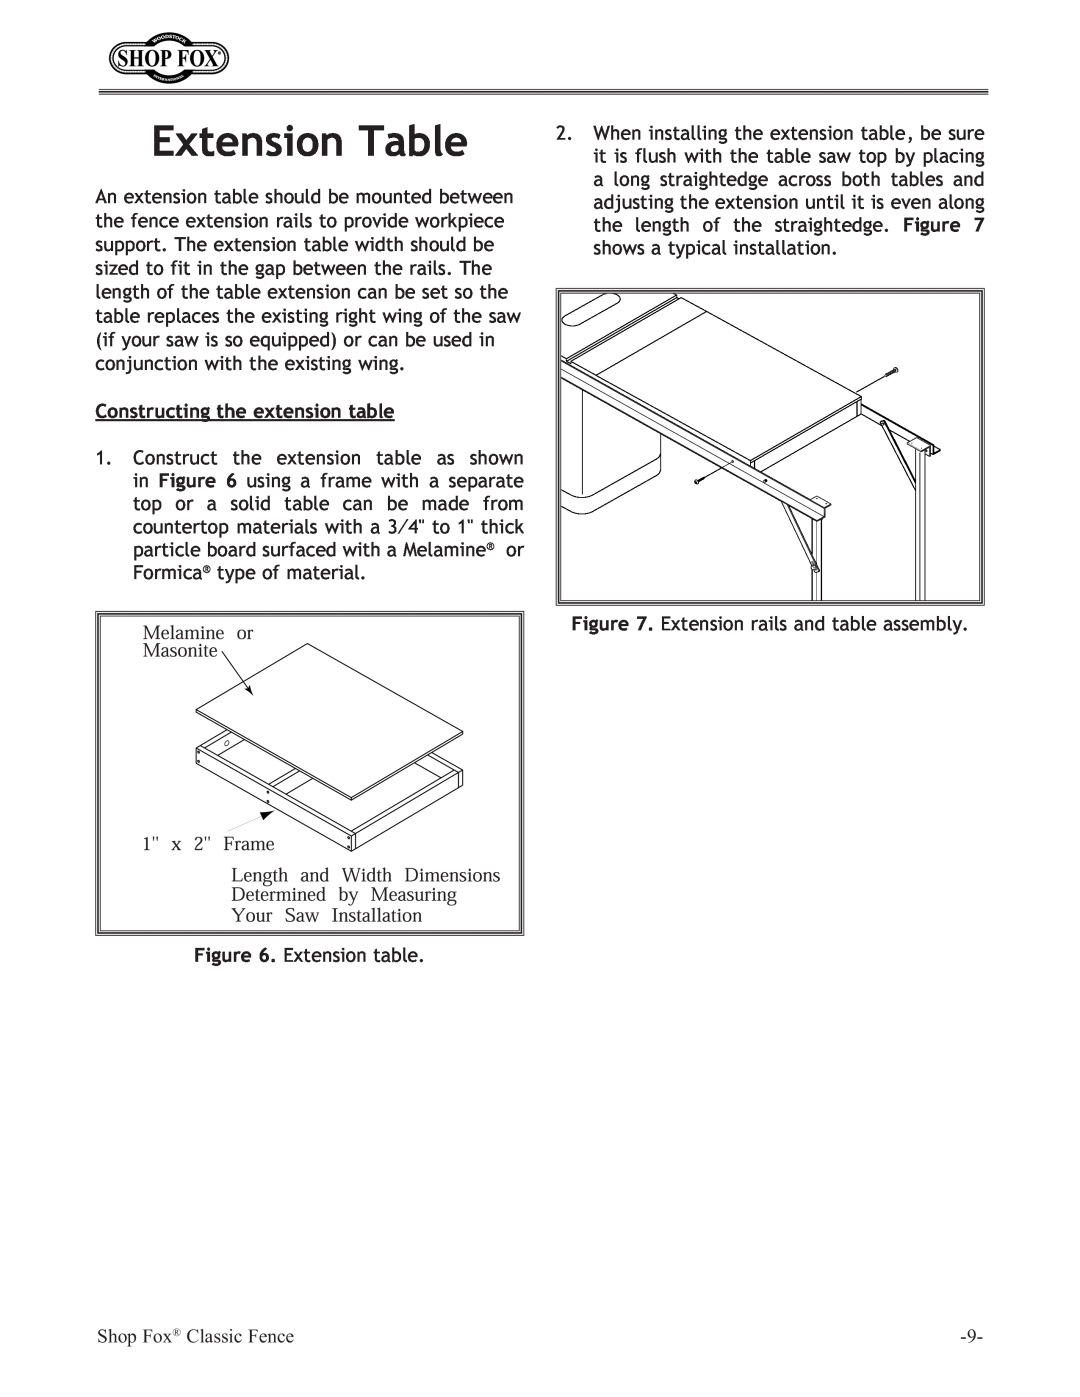 Woodstock W2005 instruction manual Extension Table, Constructing the extension table 